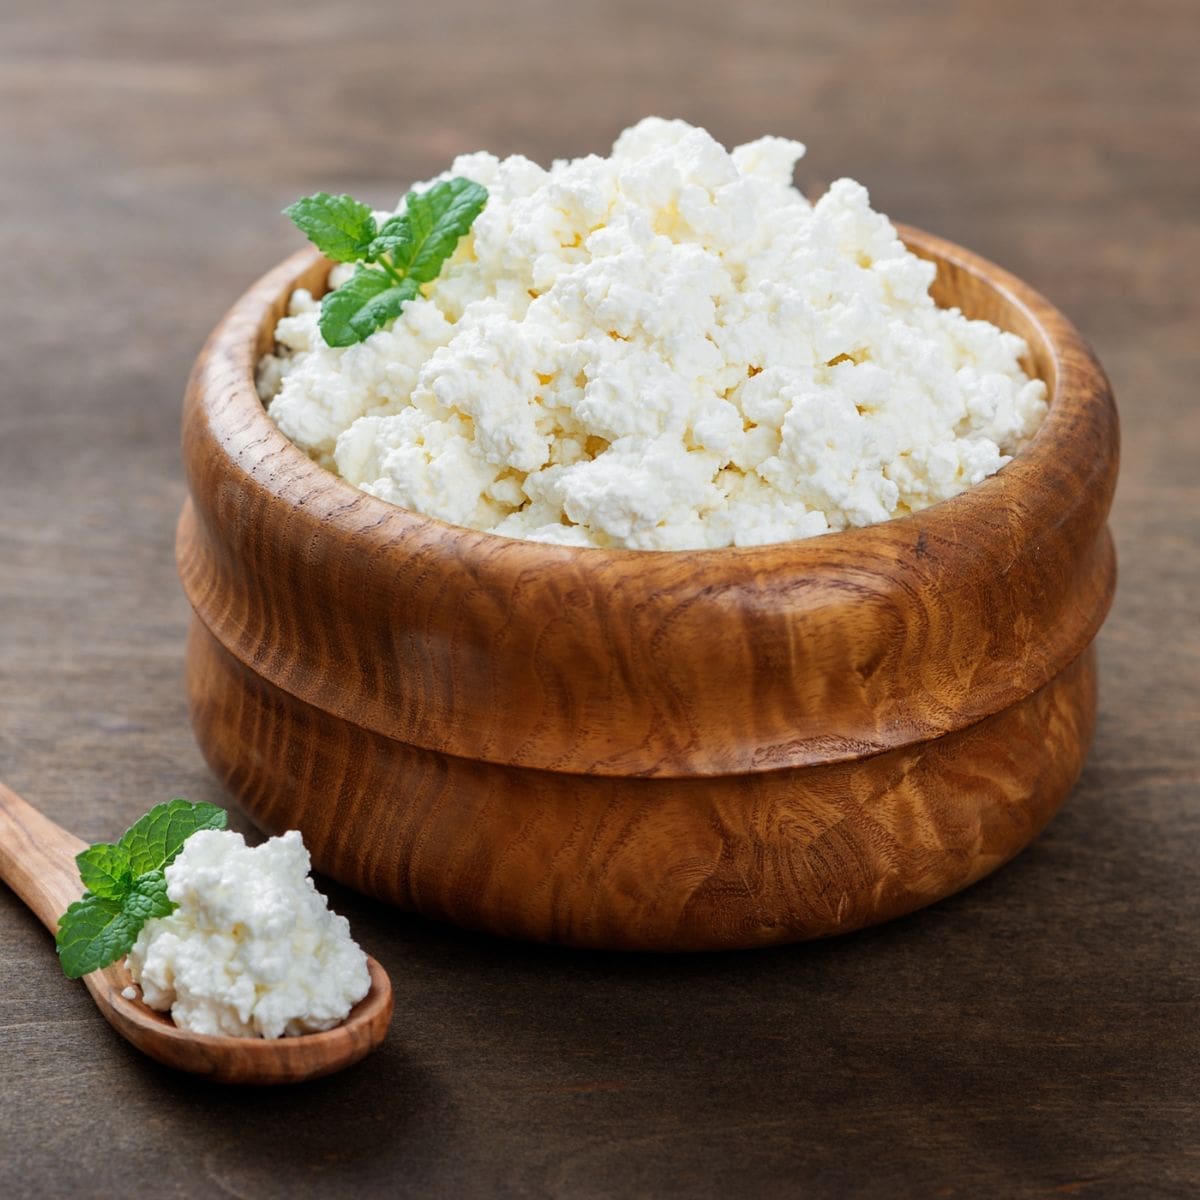 How To Store Cottage Cheese (Plus Stay-Fresh Tips)